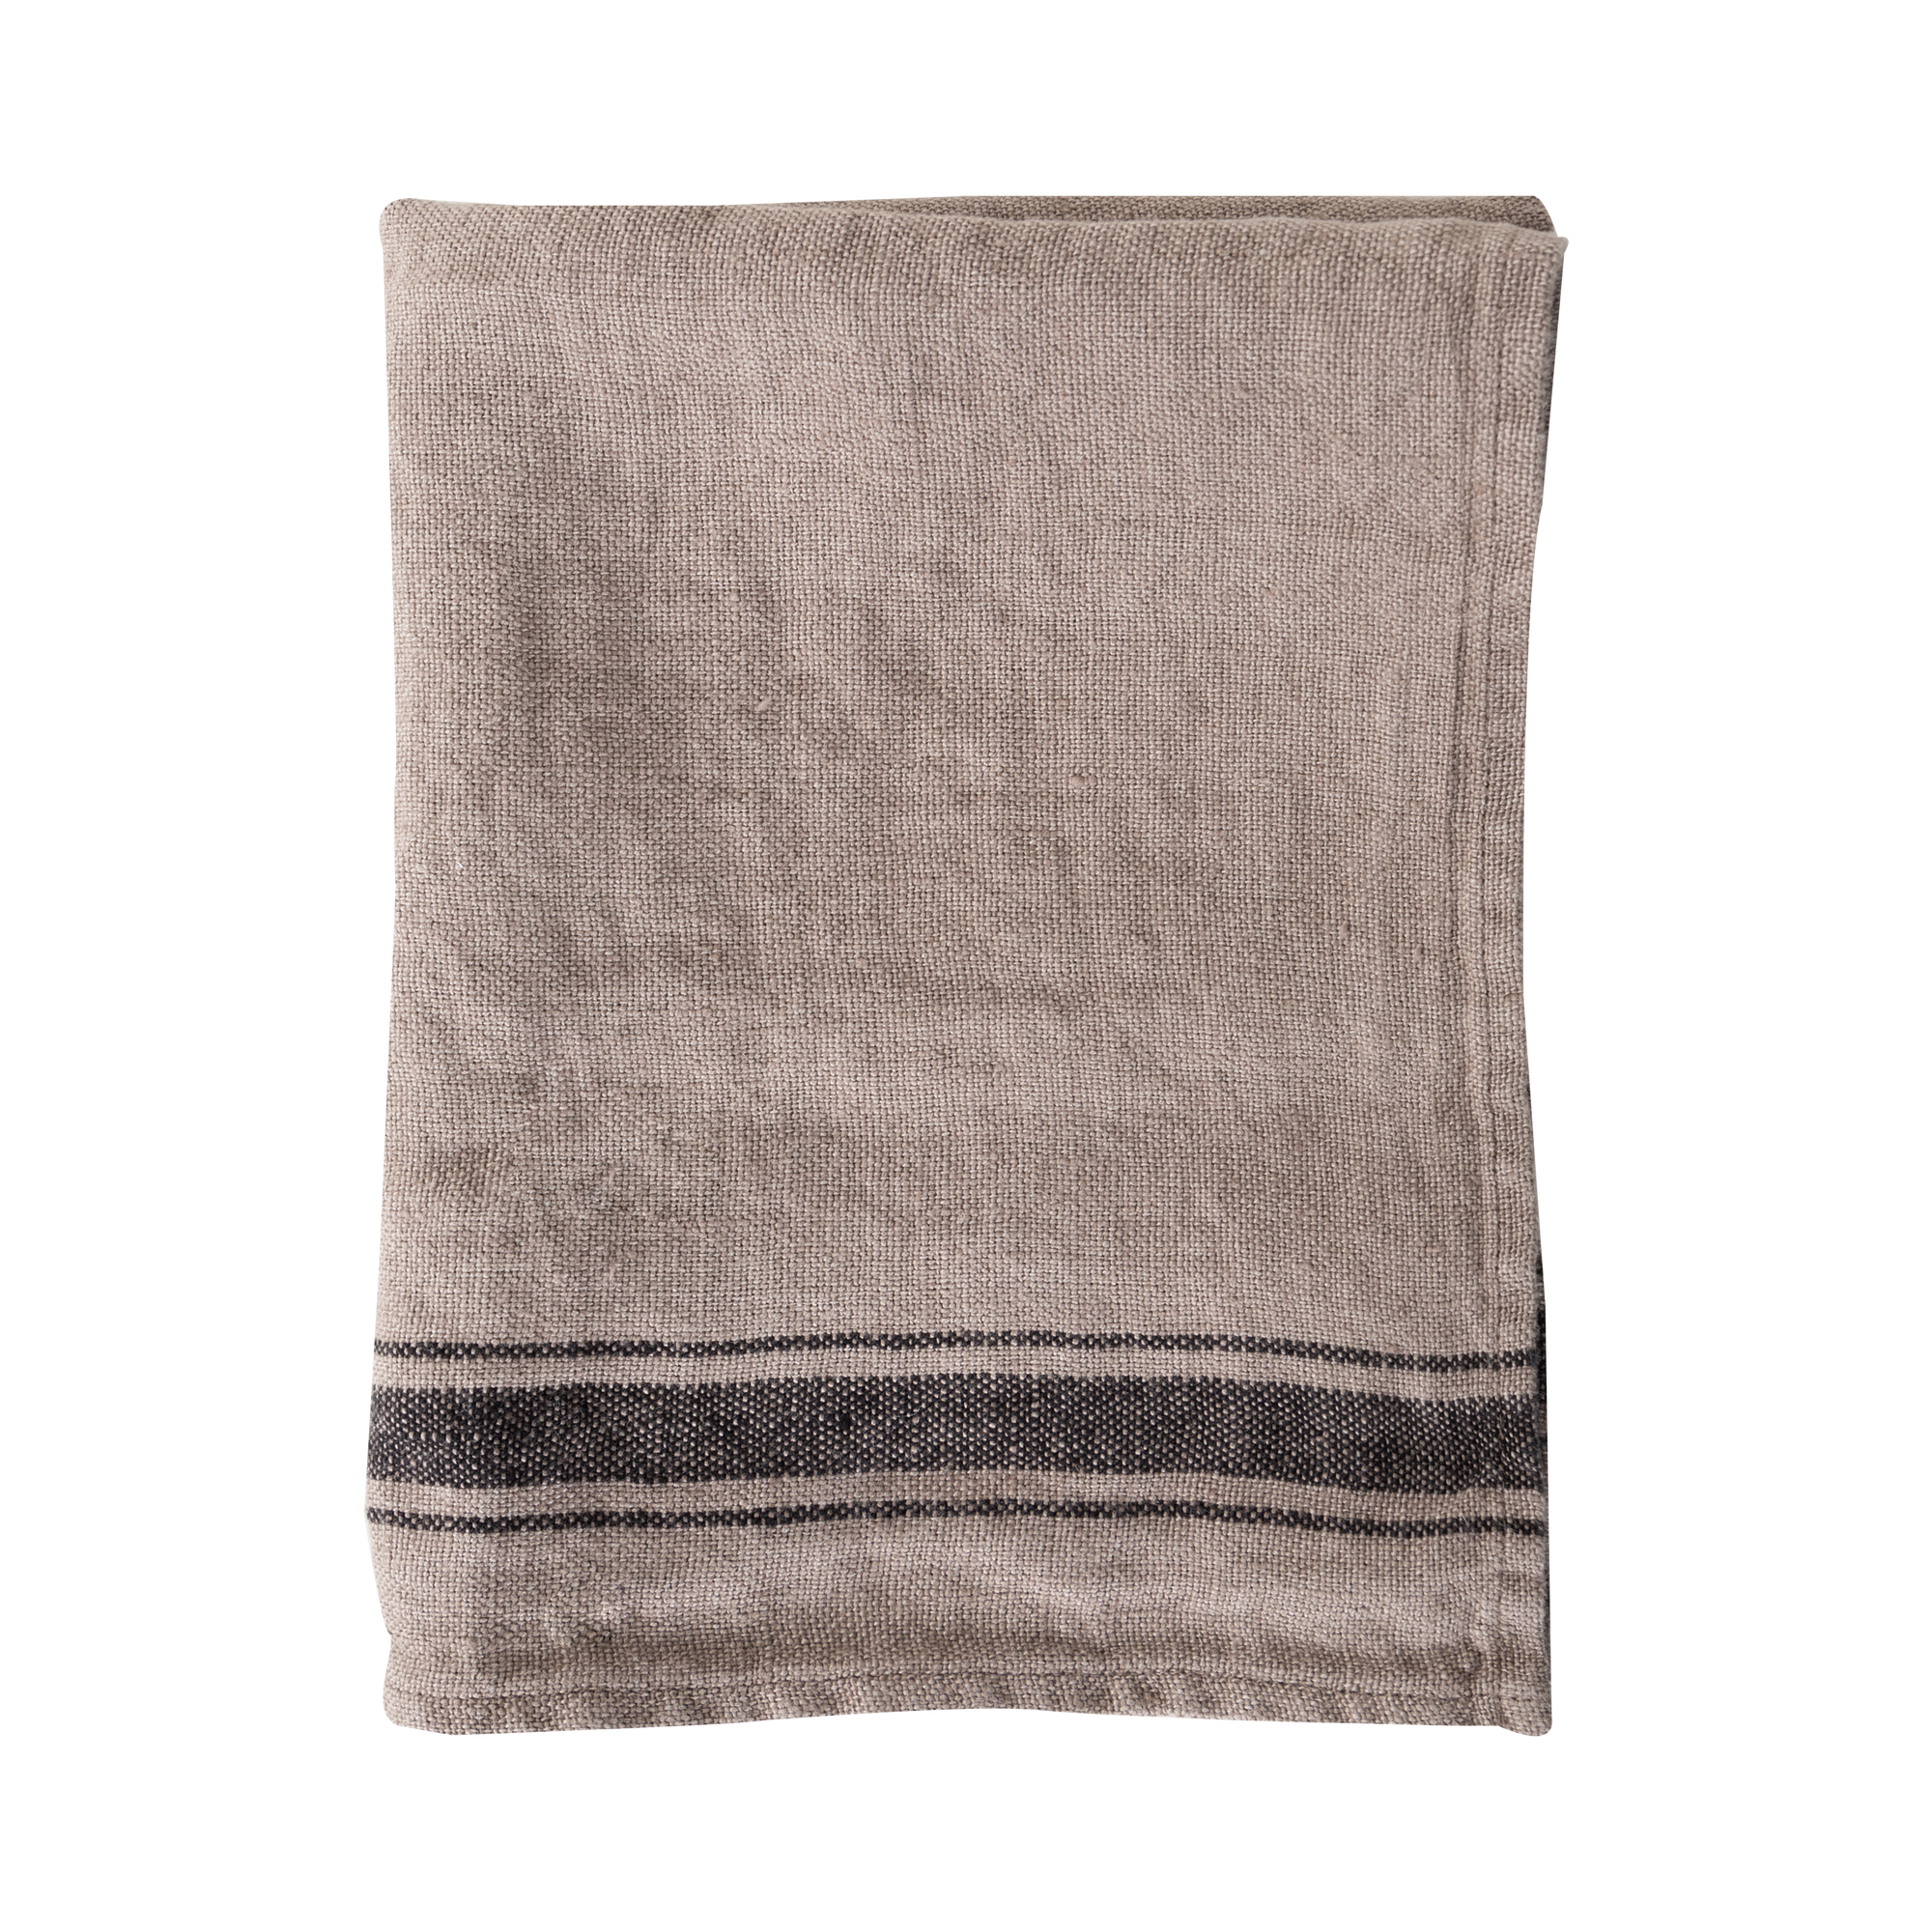 The Linen Stripe Napkin is sustainably crafted from 100% stonewash linen that has been produced in small batches using non-toxic dyes.